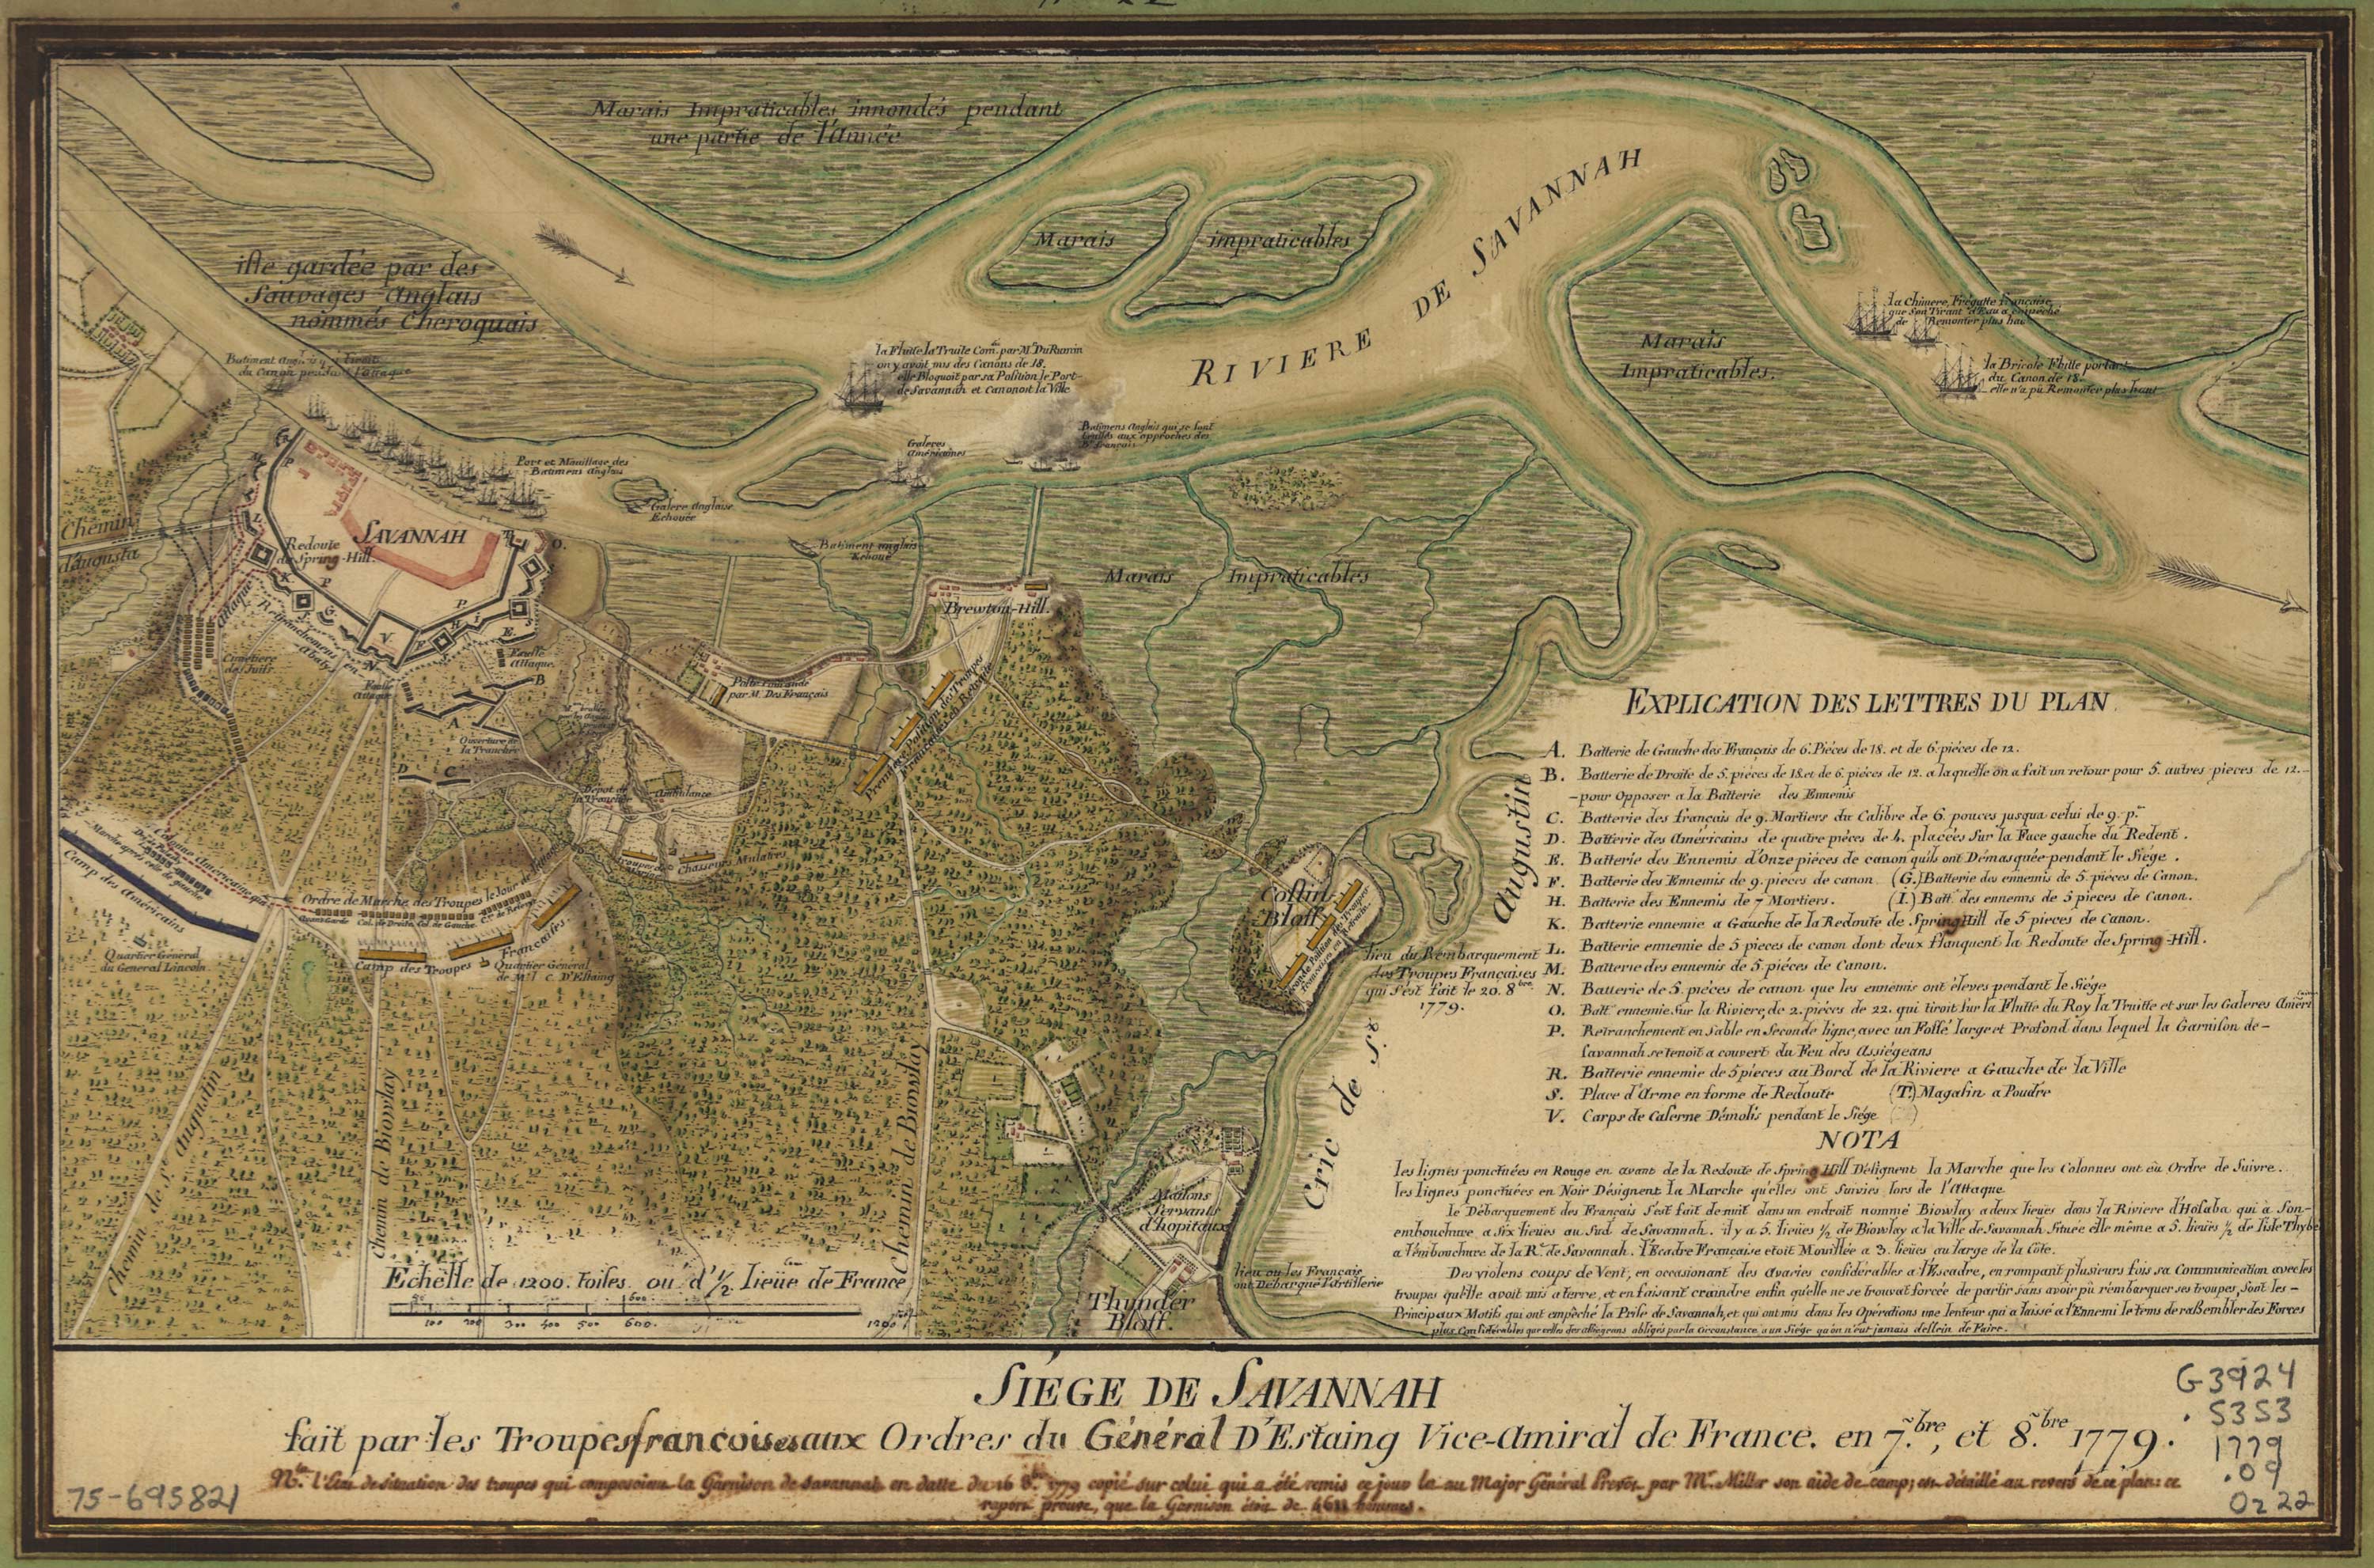 French pictorial map of the Siege on Savannah